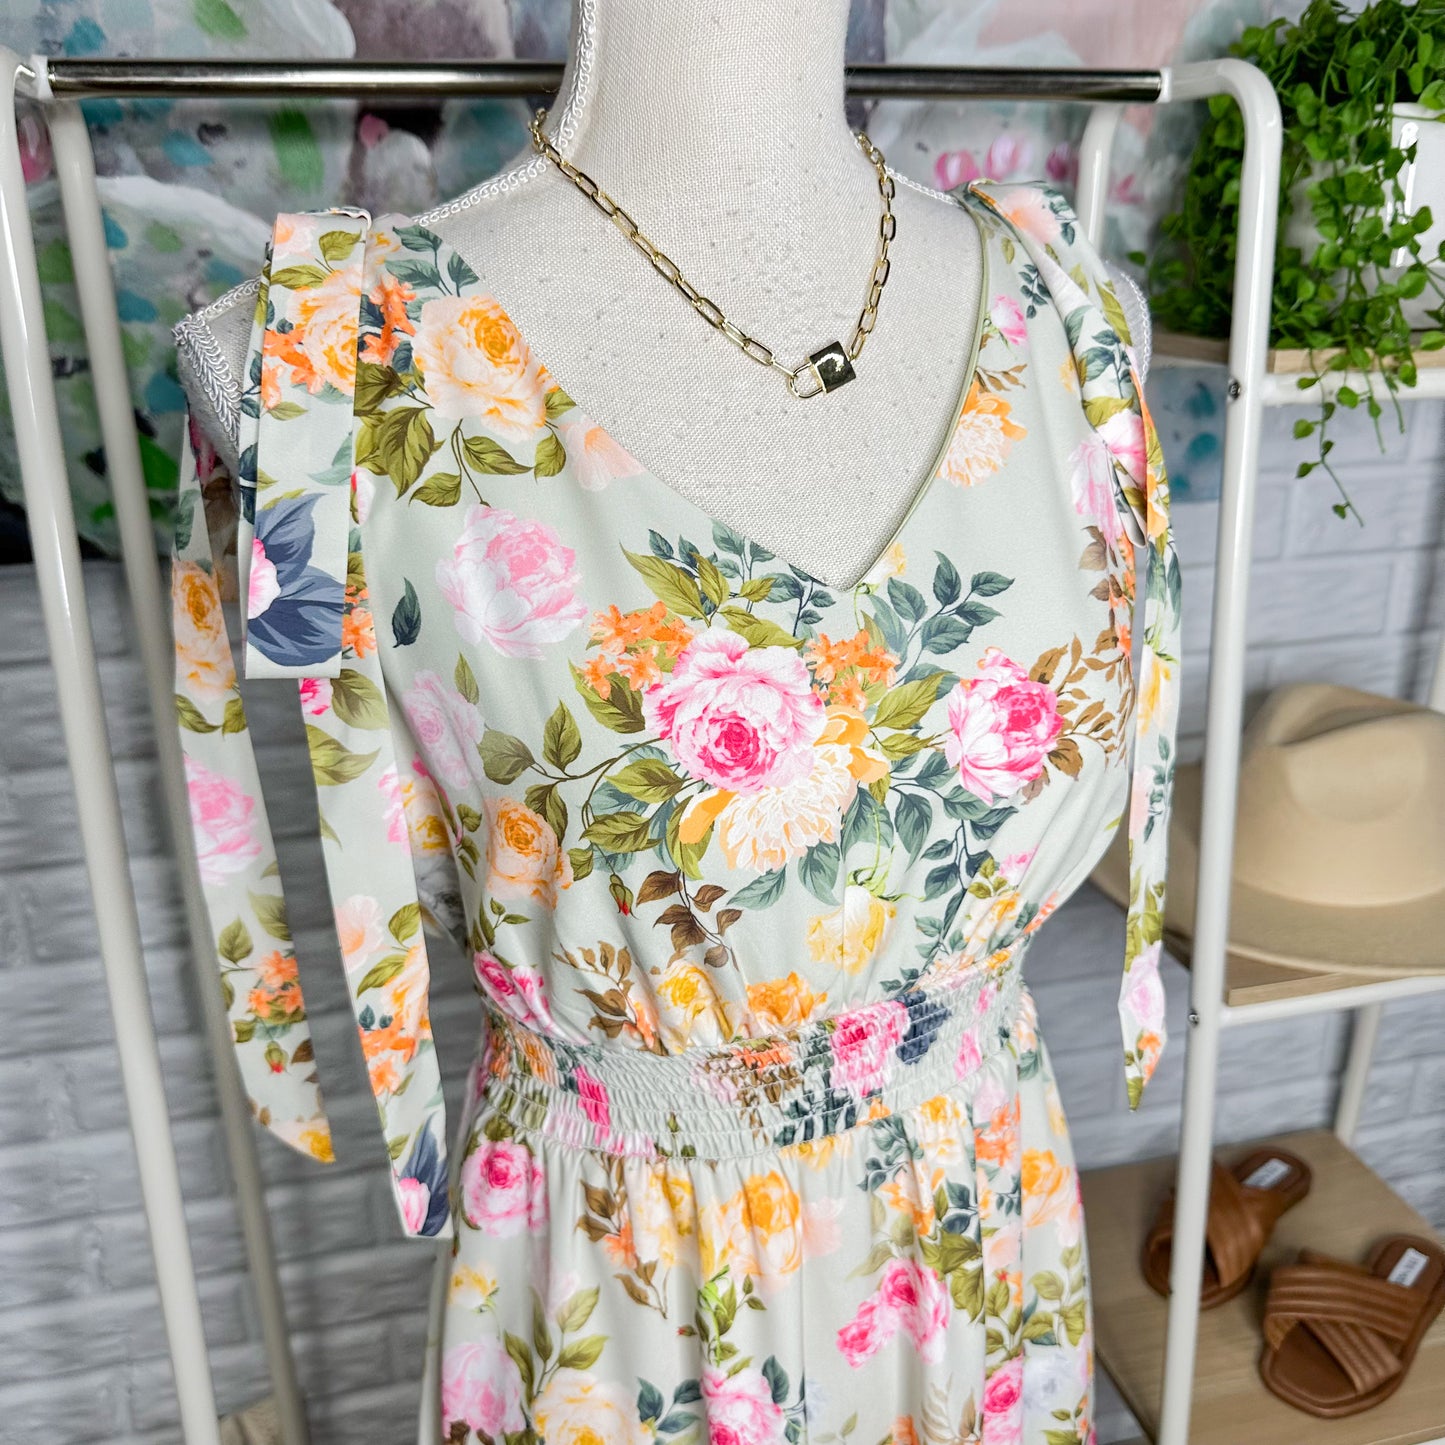 Grace Karin New Green Floral Dress Size Small